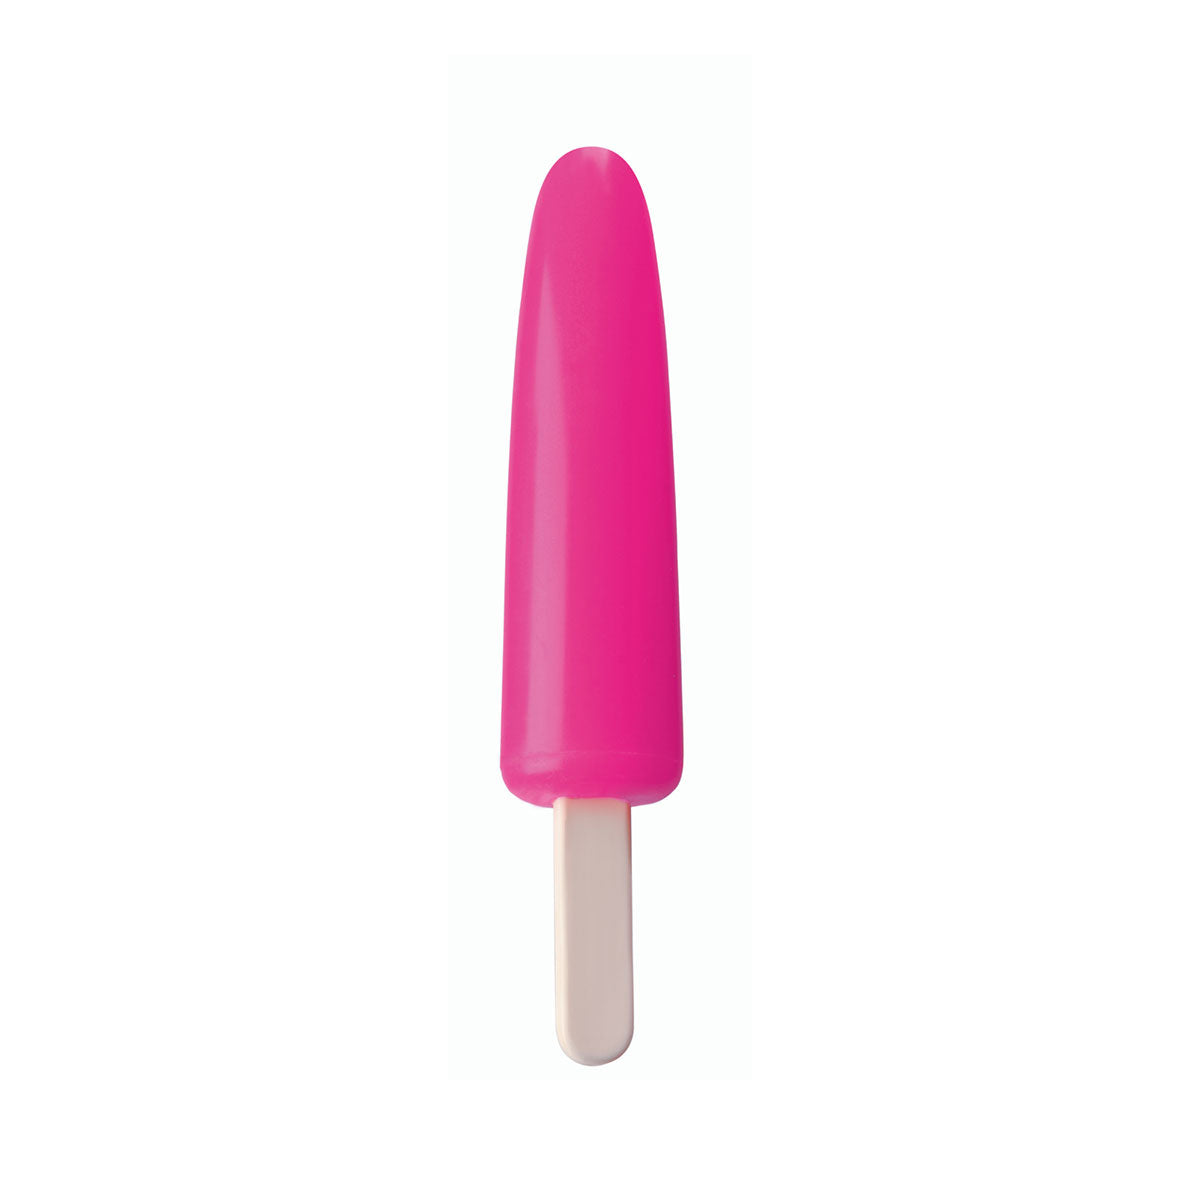 iScream Popsicle Dil by Love to Love - Danger Pink Intimates Adult Boutique